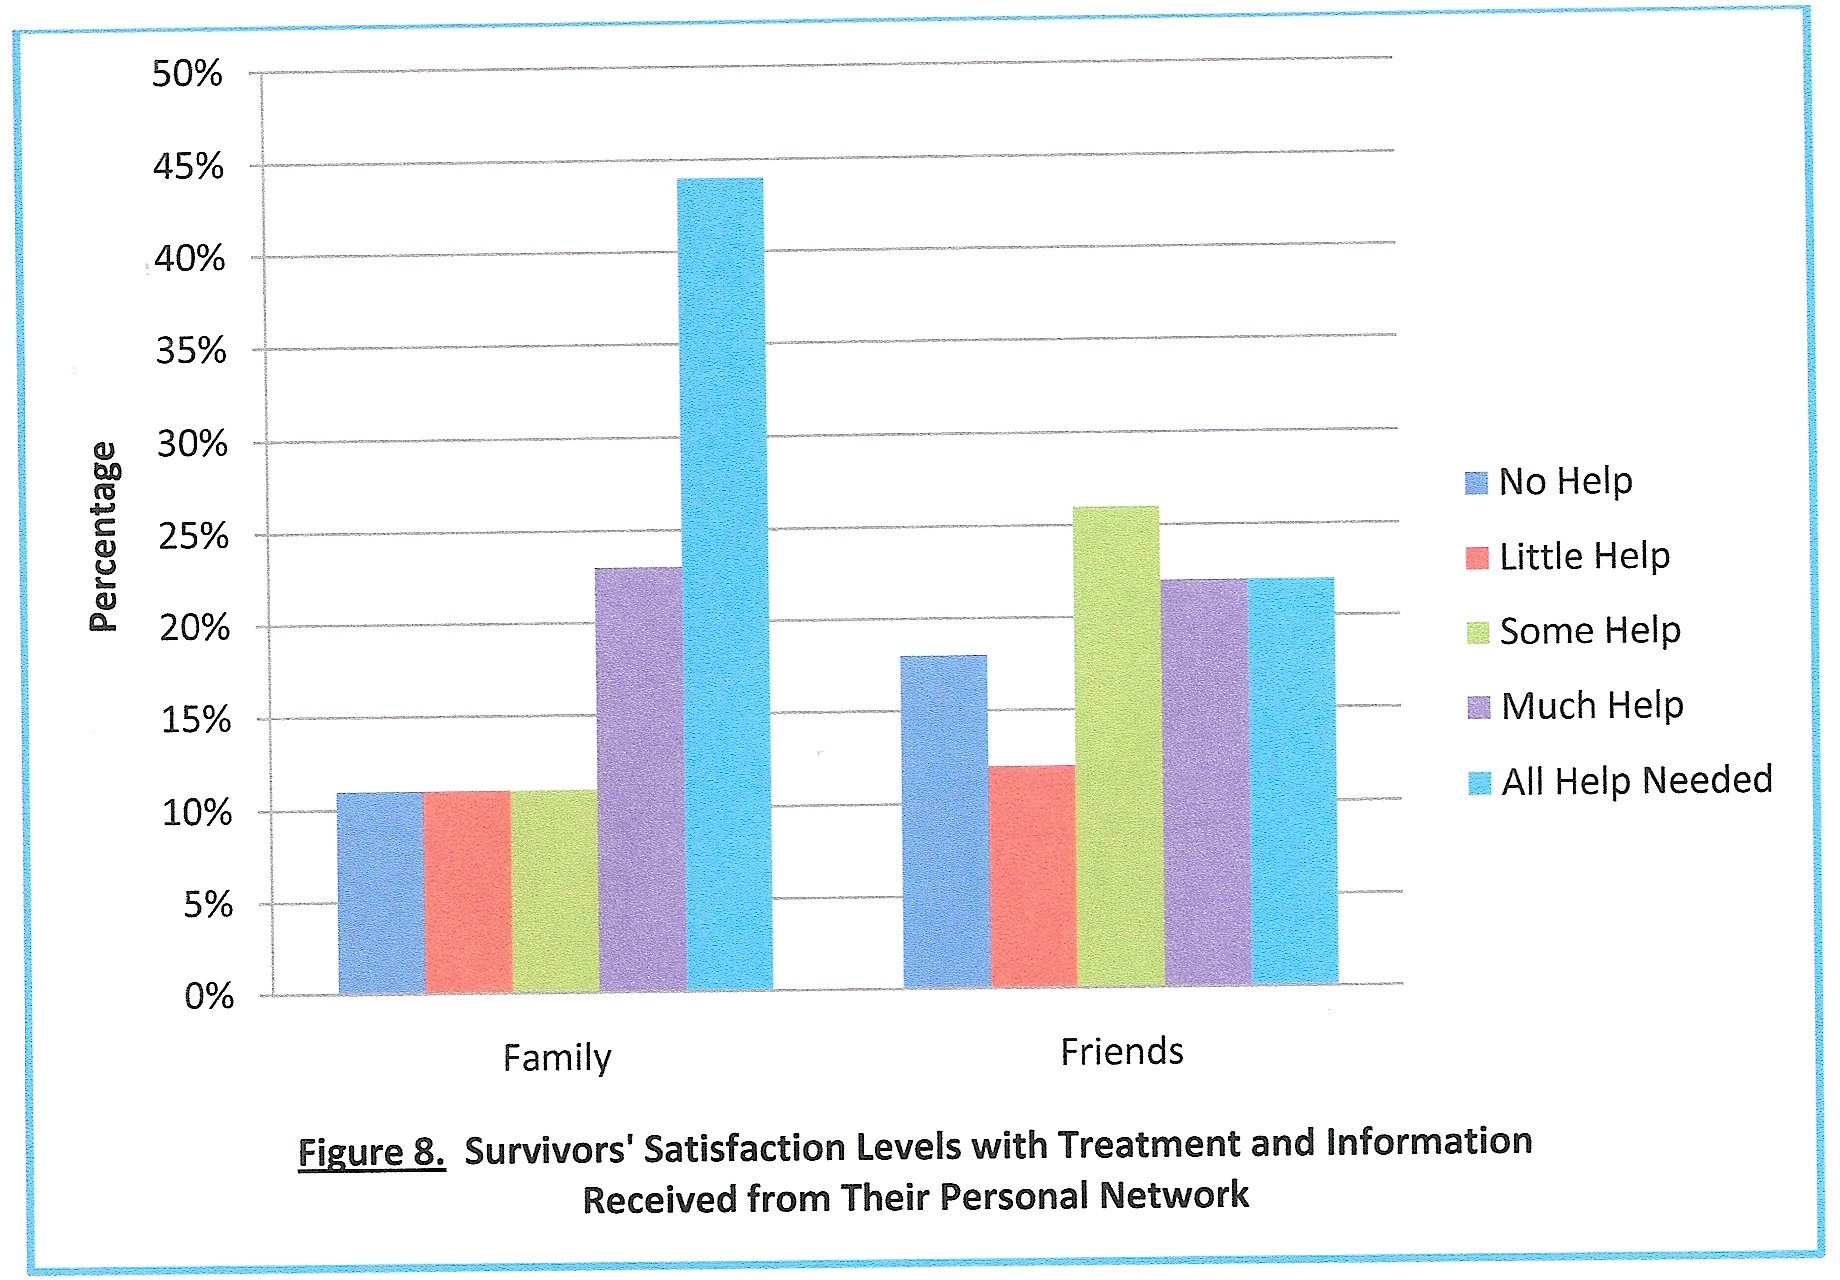 Survivors' Satisfaction Levels with Treatment and Information Received from Their Personal Network